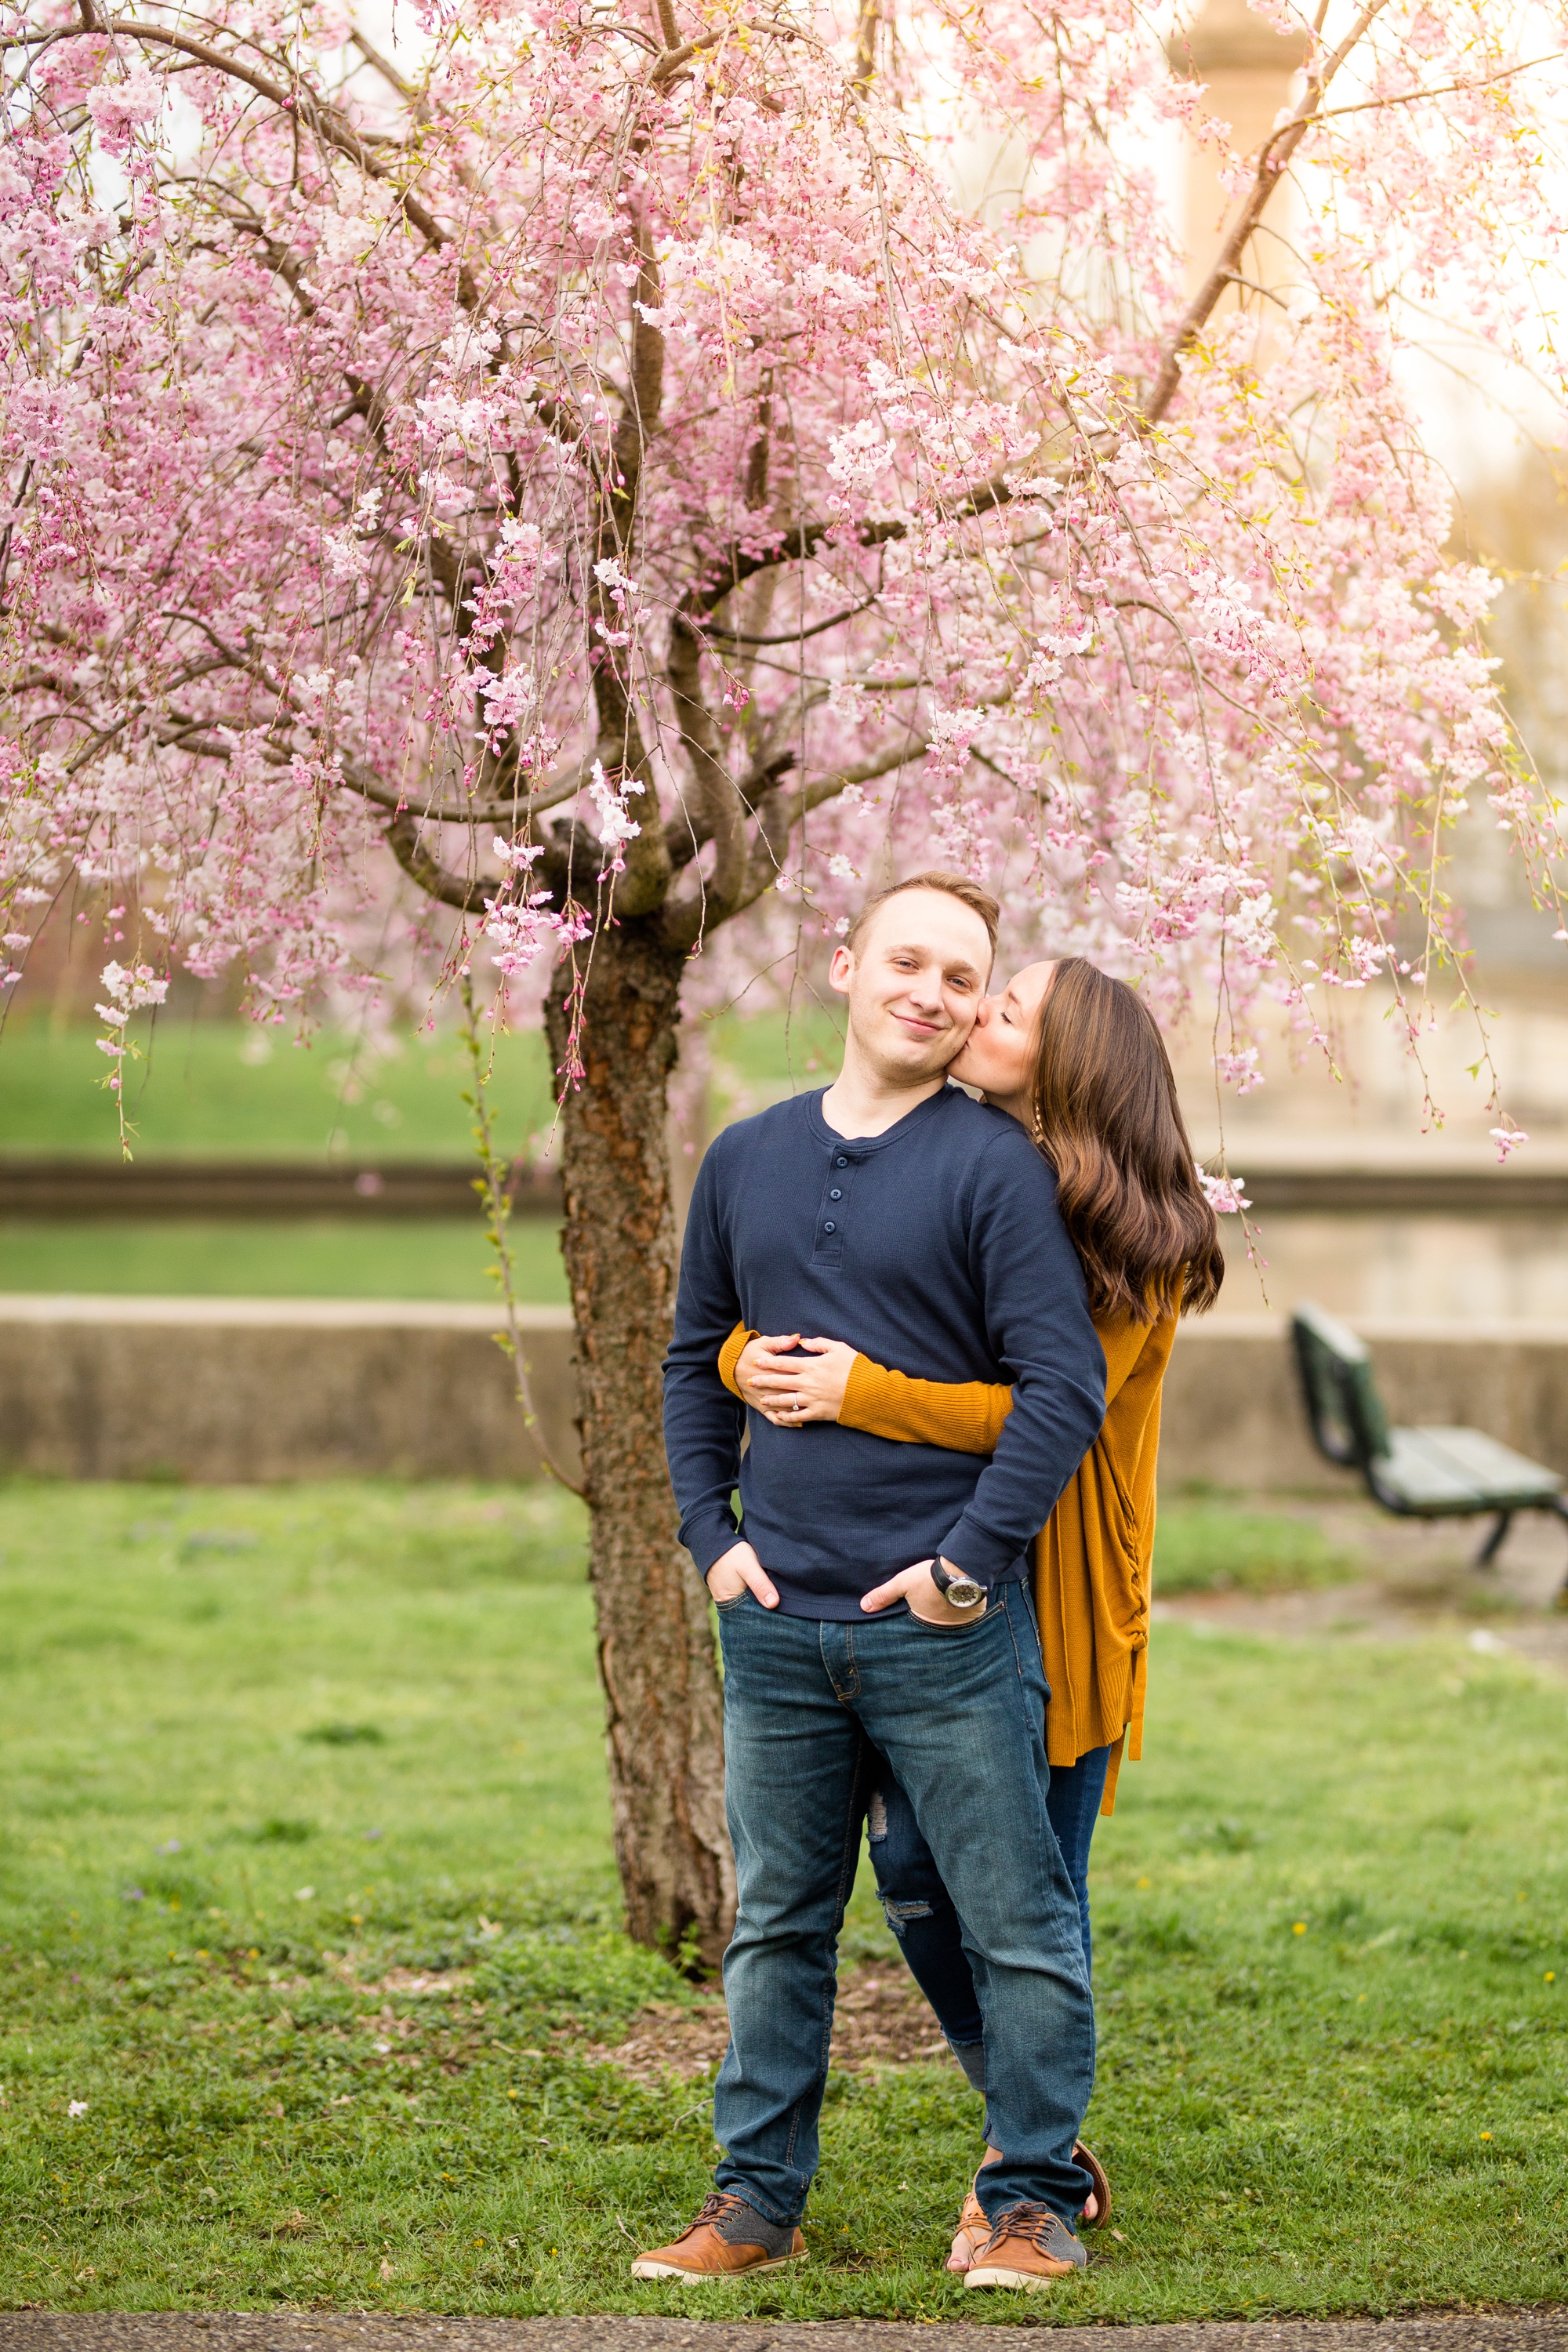 allegheny commons park engagement photos, north shore engagement photos, north side engagement photos, mexican war streets, spring pittsburgh engagement, pittsburgh wedding photos